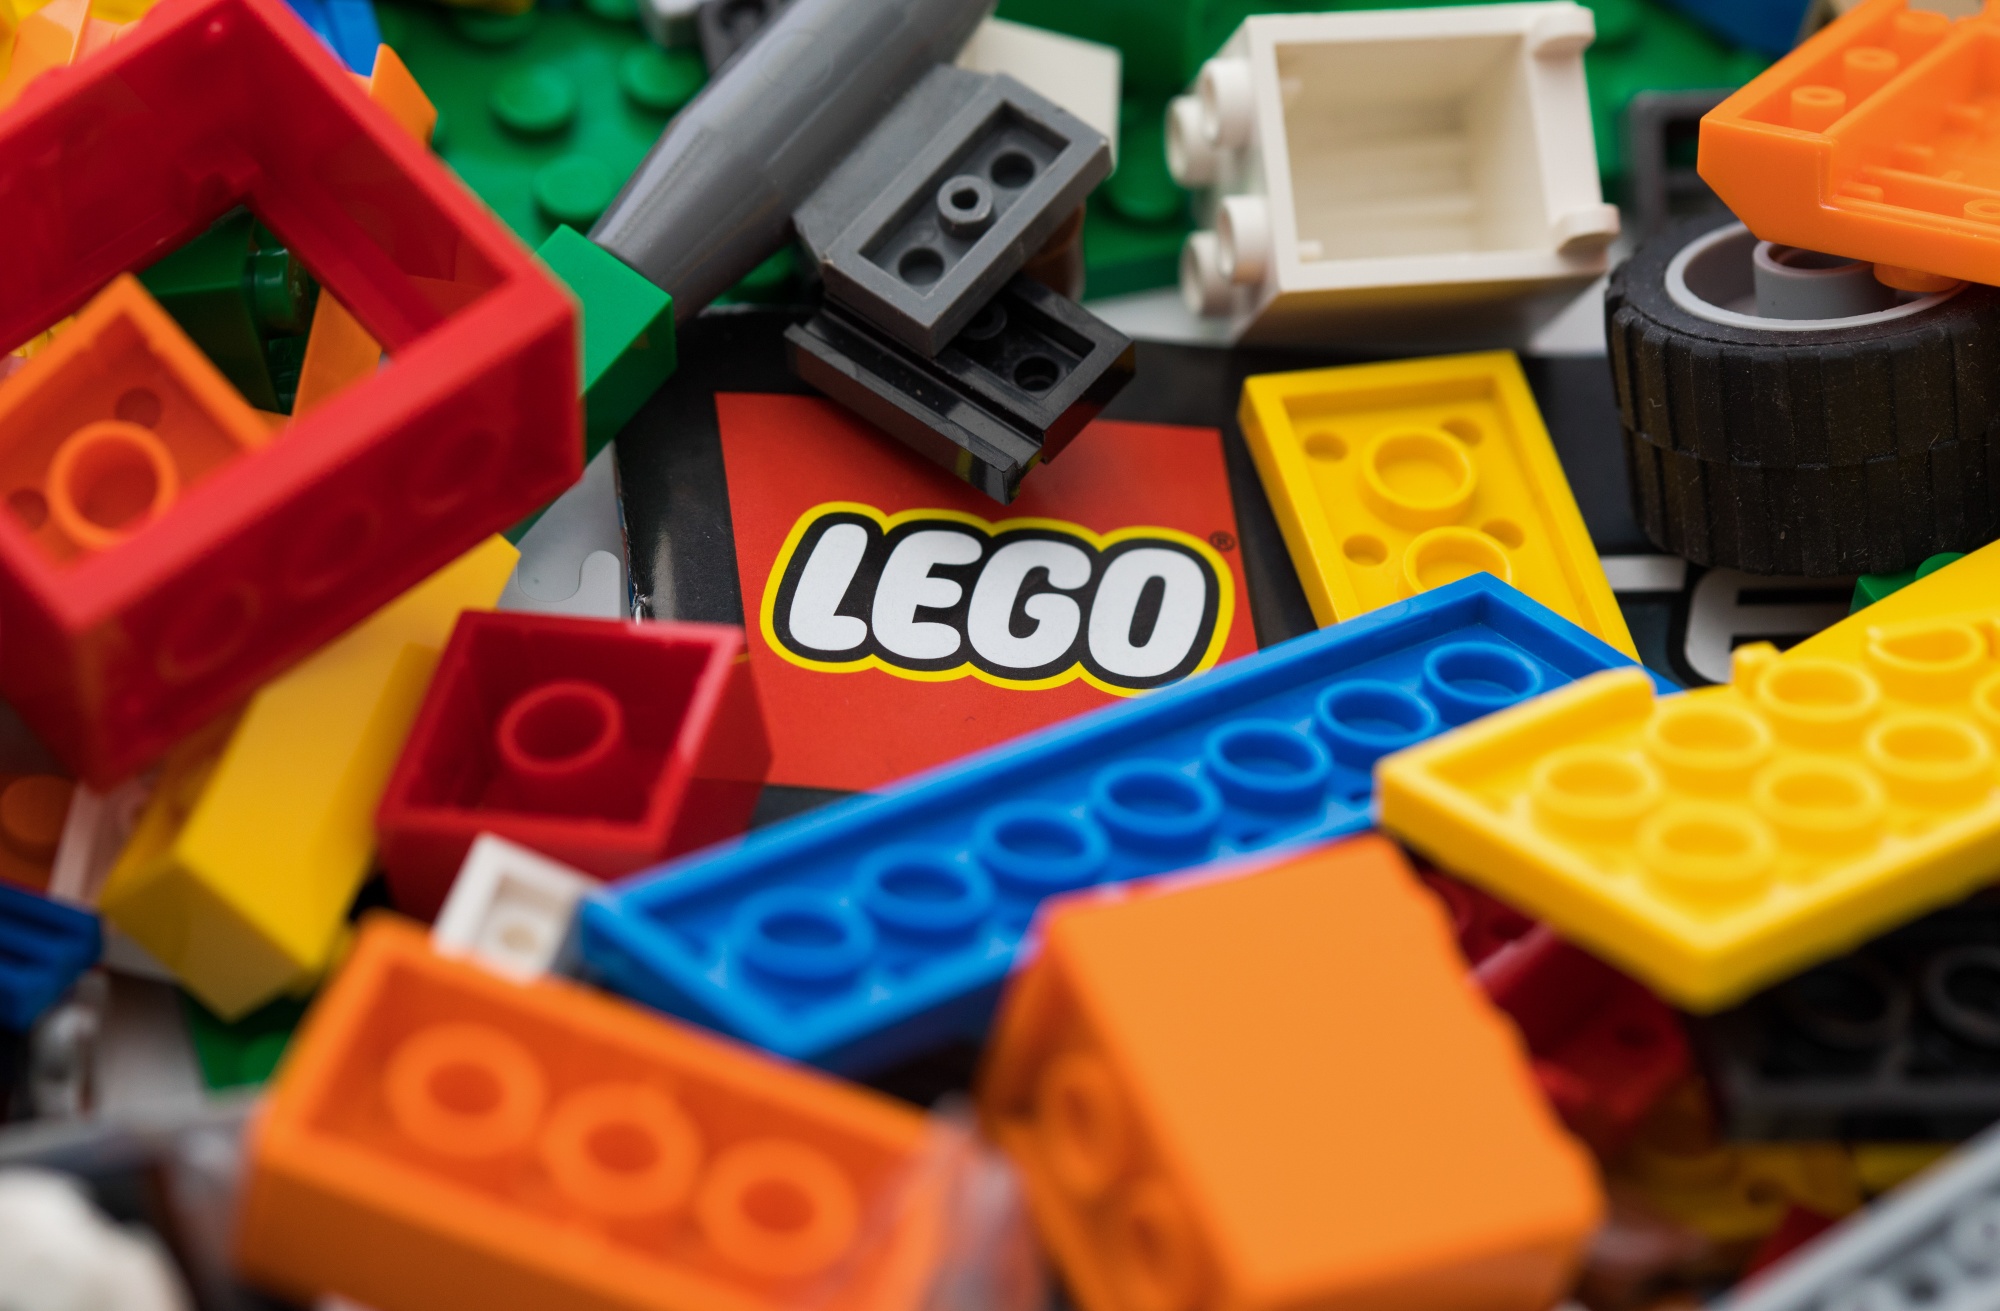 Why some people invest in toys like Lego instead of stocks and